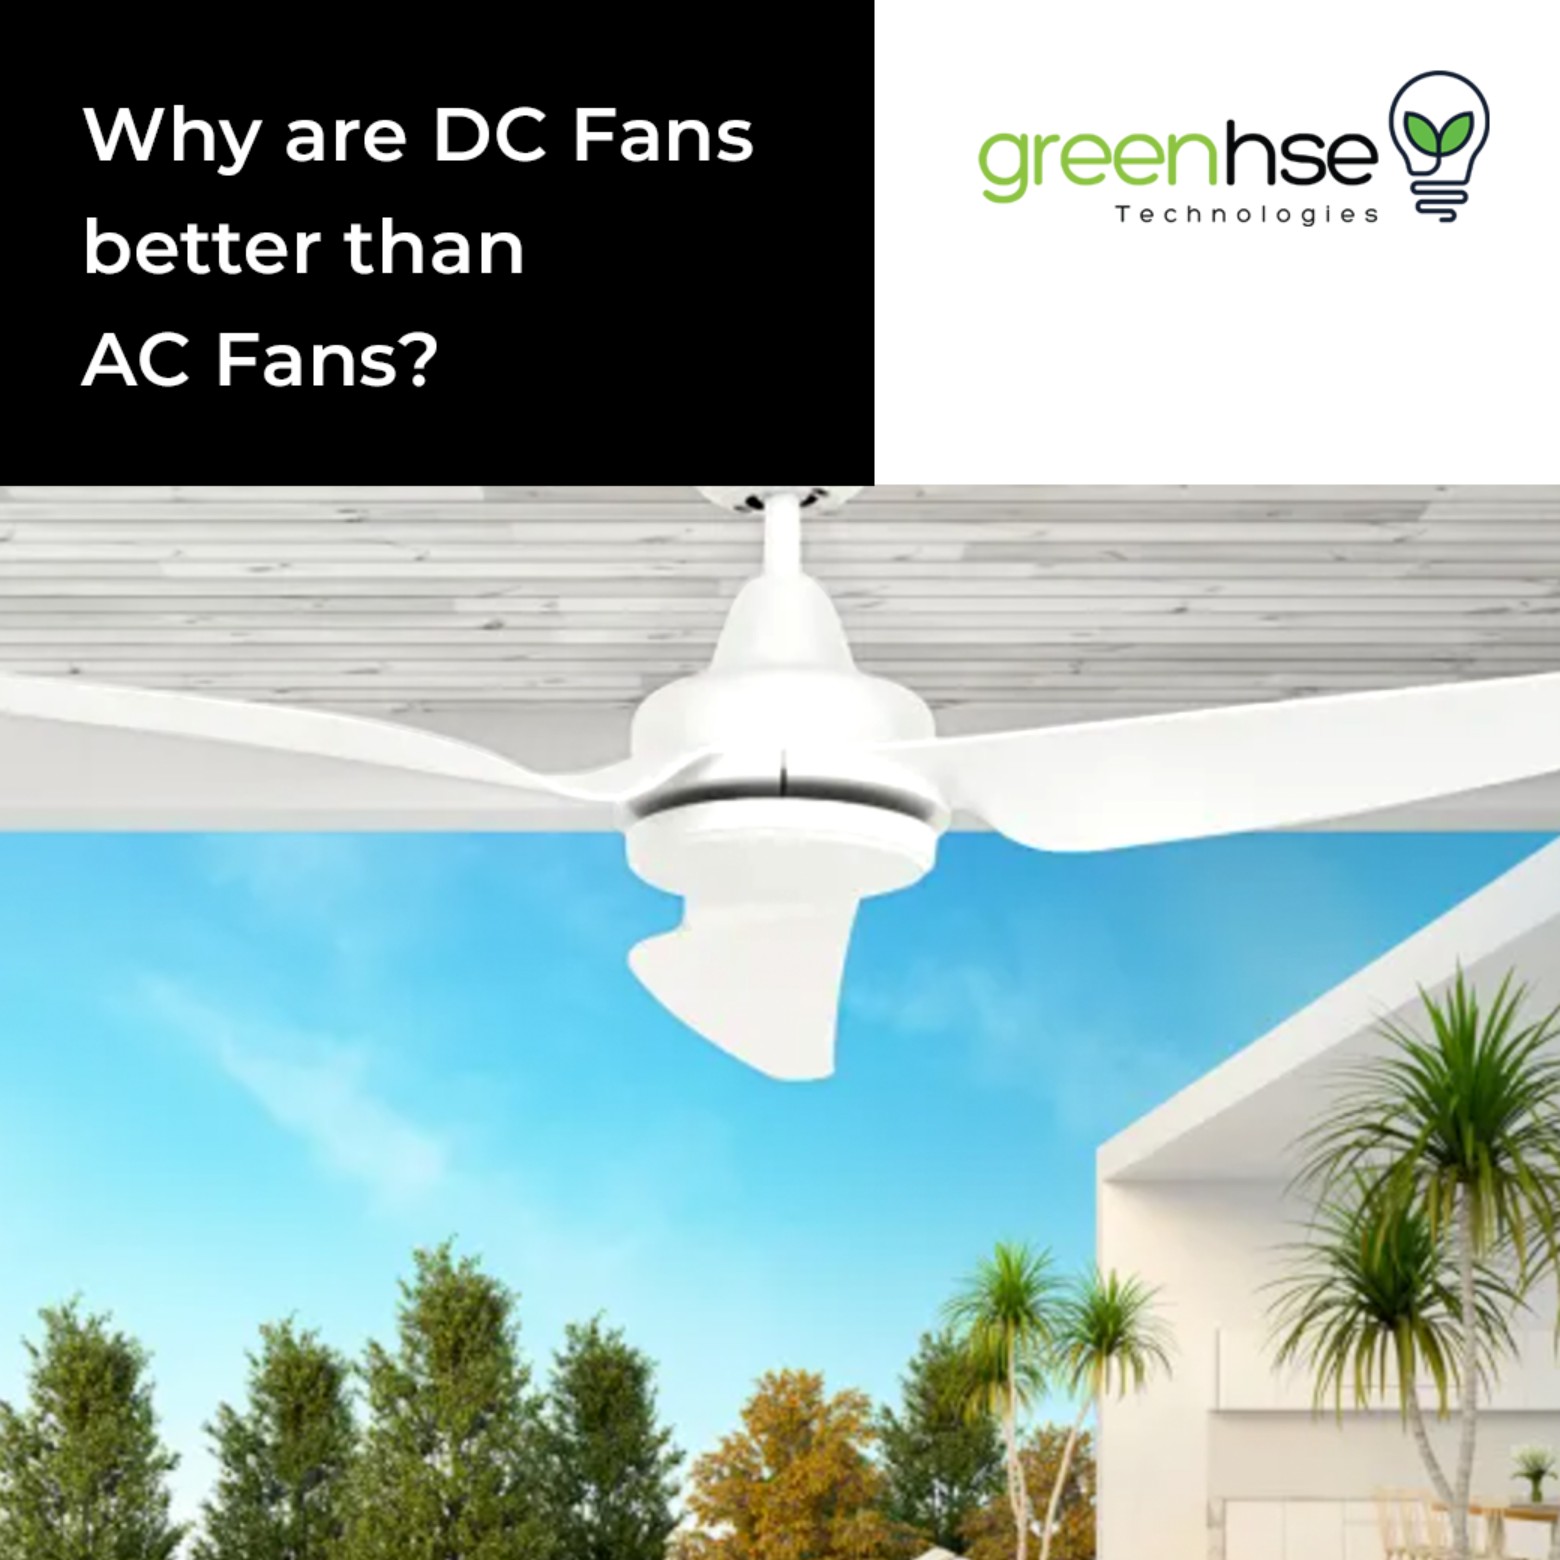 Why are DC Fans better than AC Fans